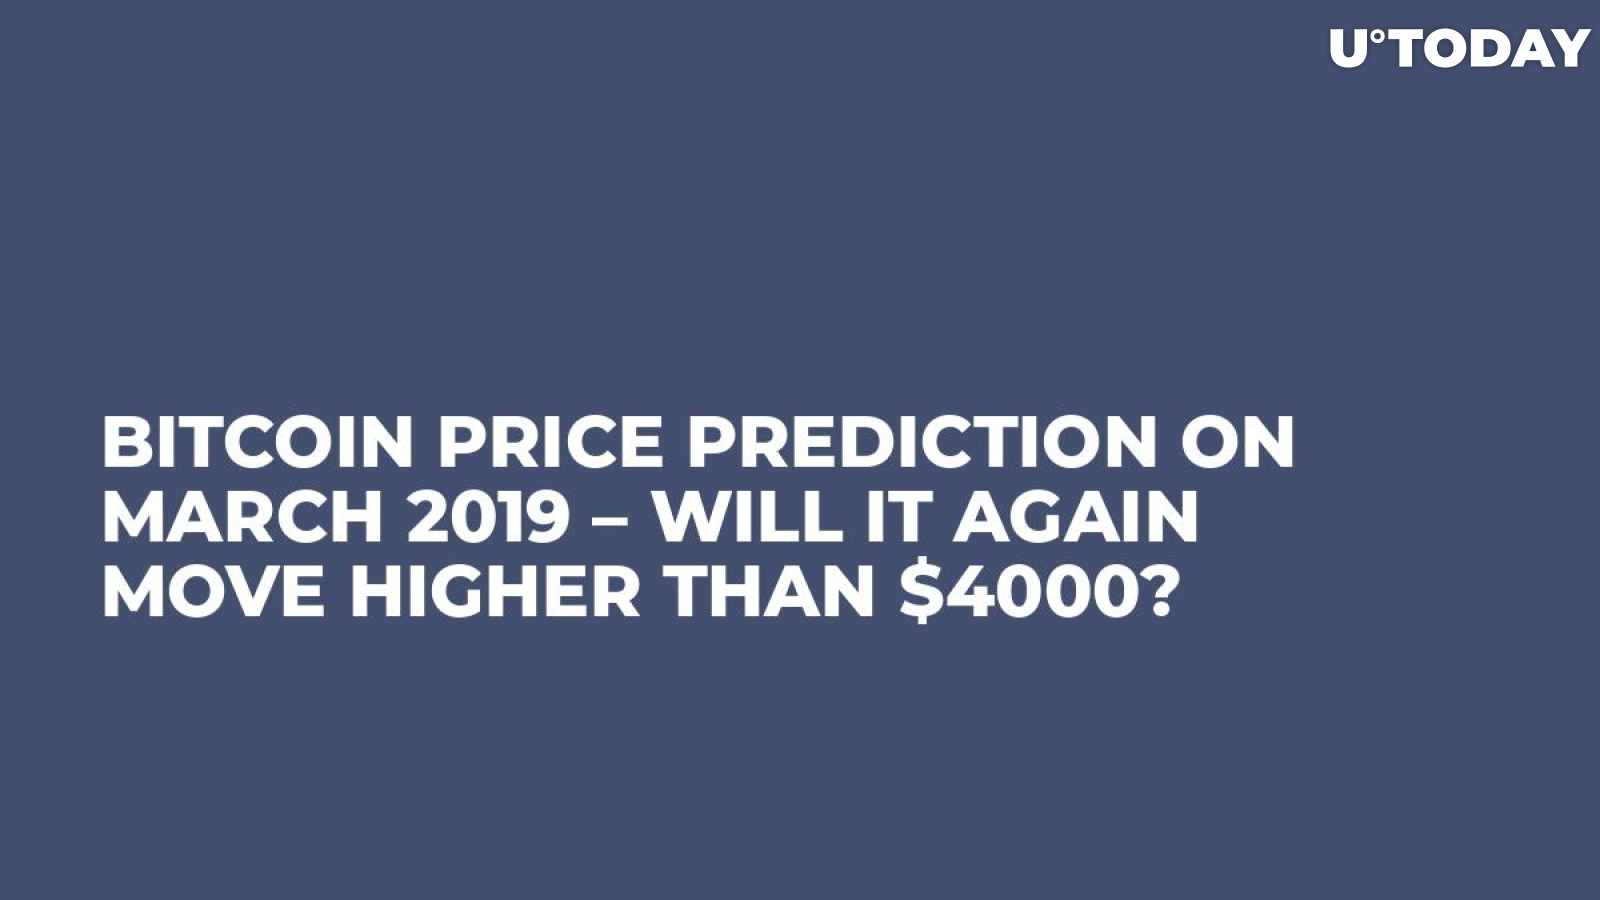 Bitcoin Price Prediction on March 2019 – Will It Again Move Higher Than $4000?